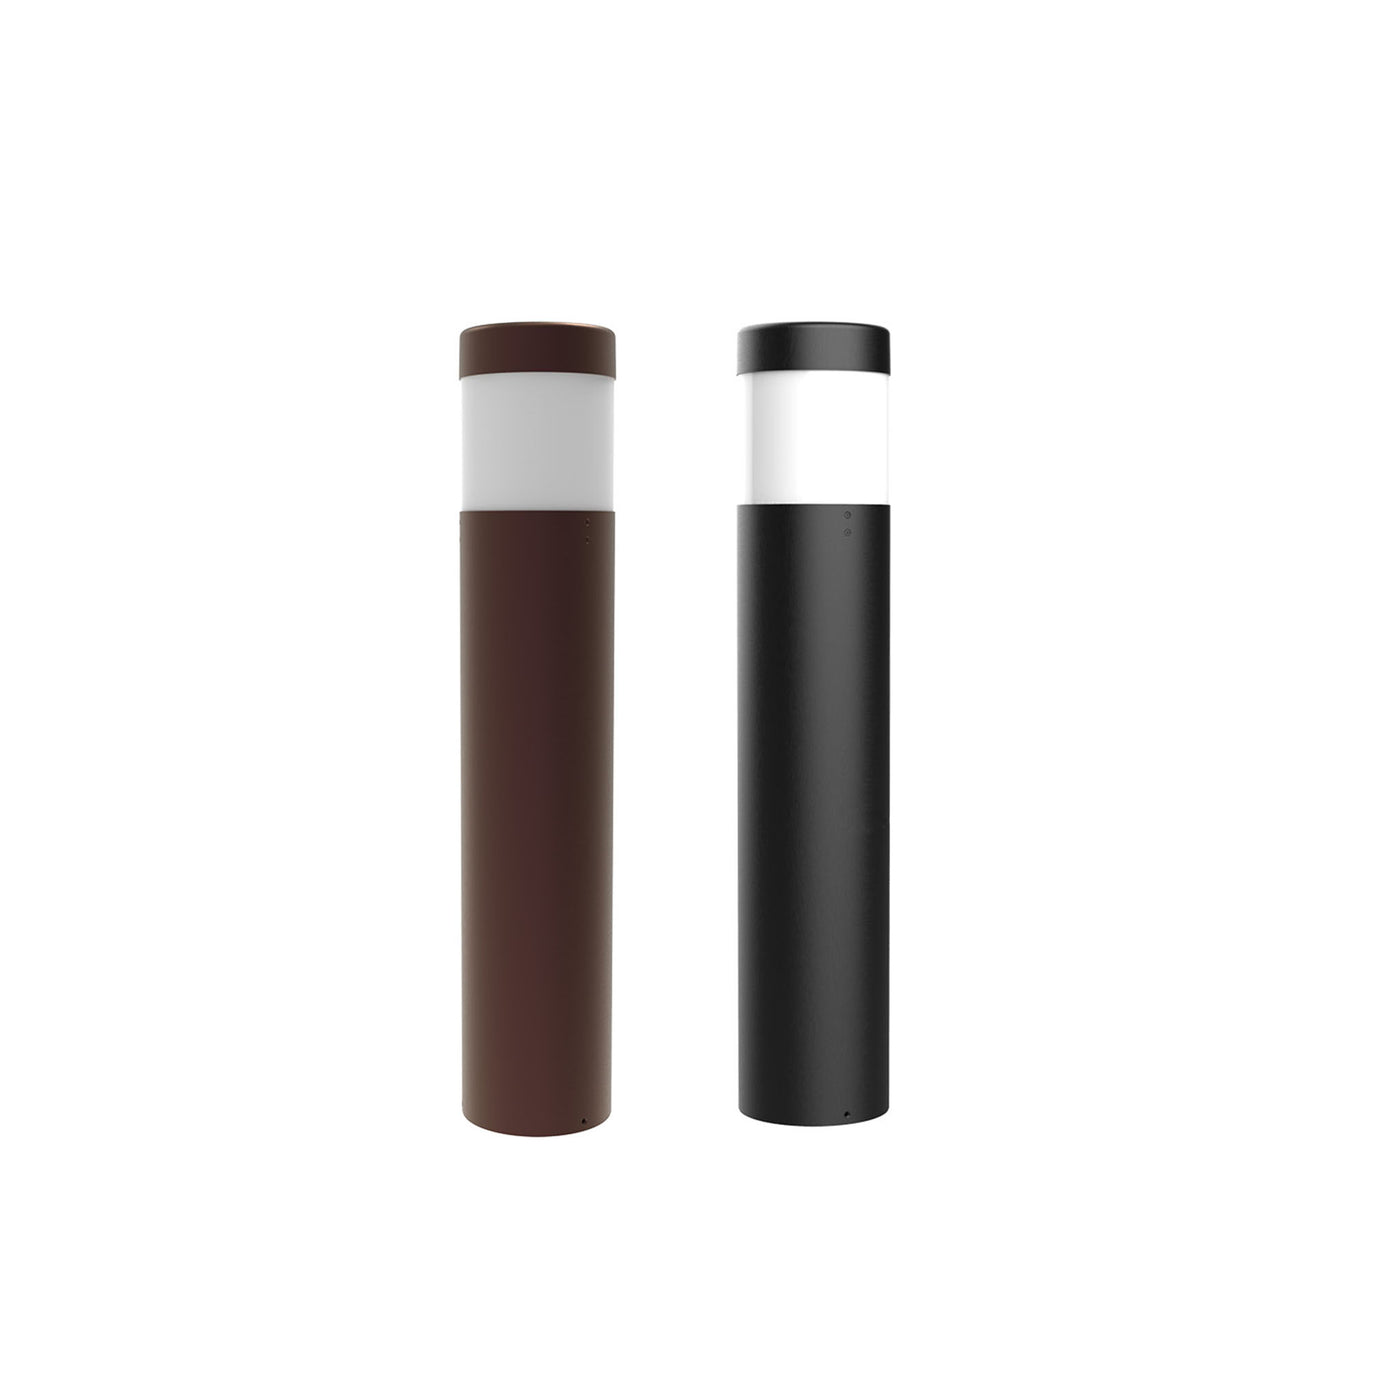 8" Flat Frosted Bollard, 120-277V, 4000K or 5000K, Wattage Selectable, Black or Bronze